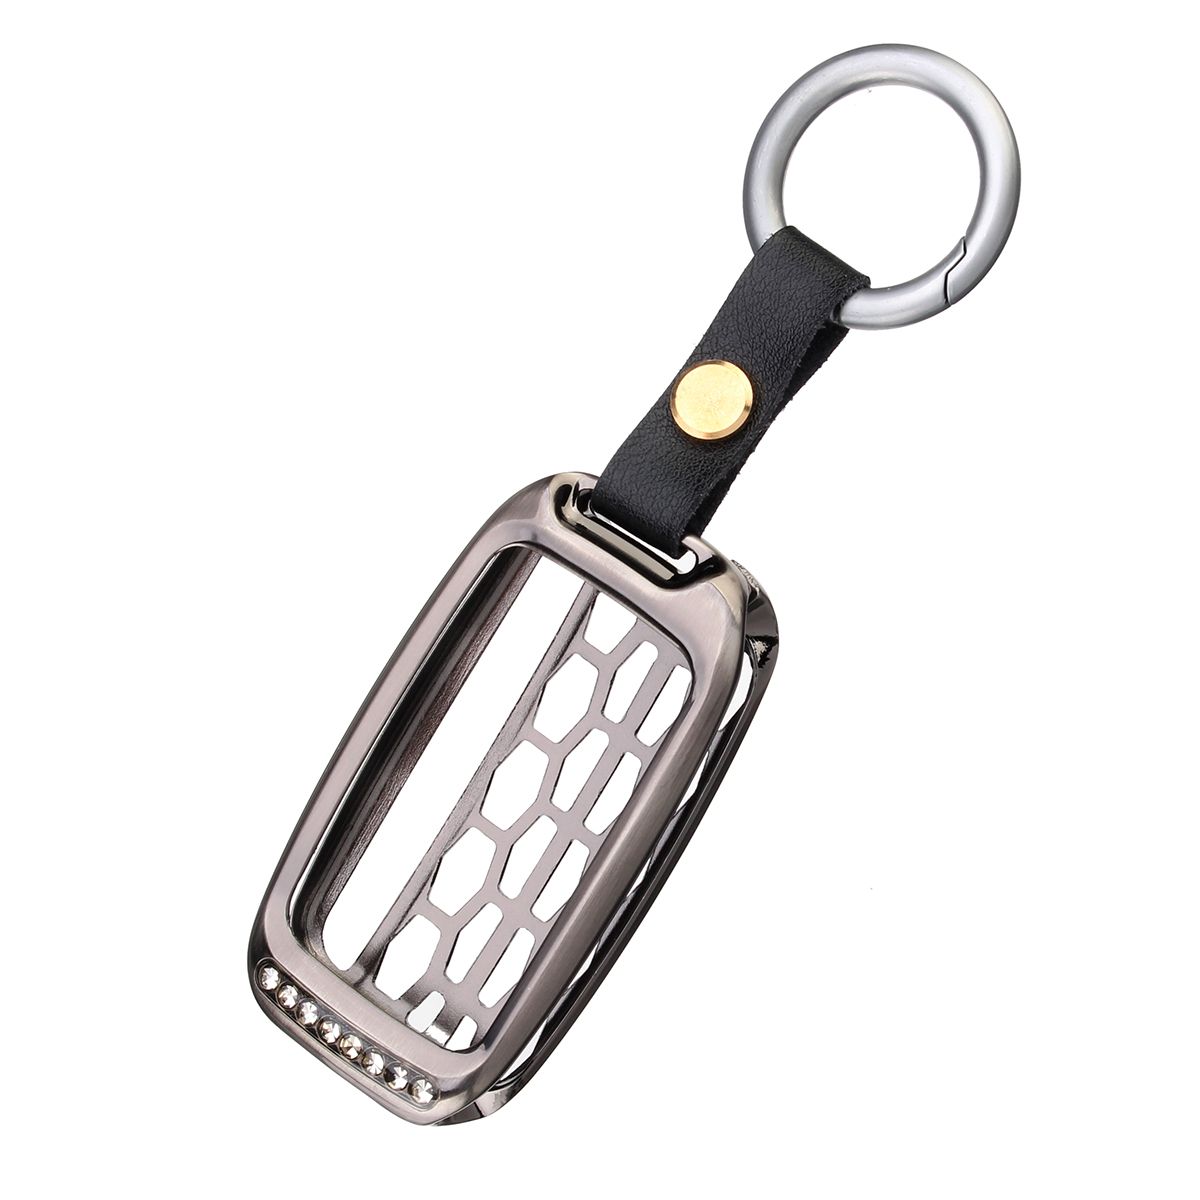 Remote-Key-Case-Shell-Holder-Aluminum-Alloy-For-Car-Key-with-Keychain-1363364